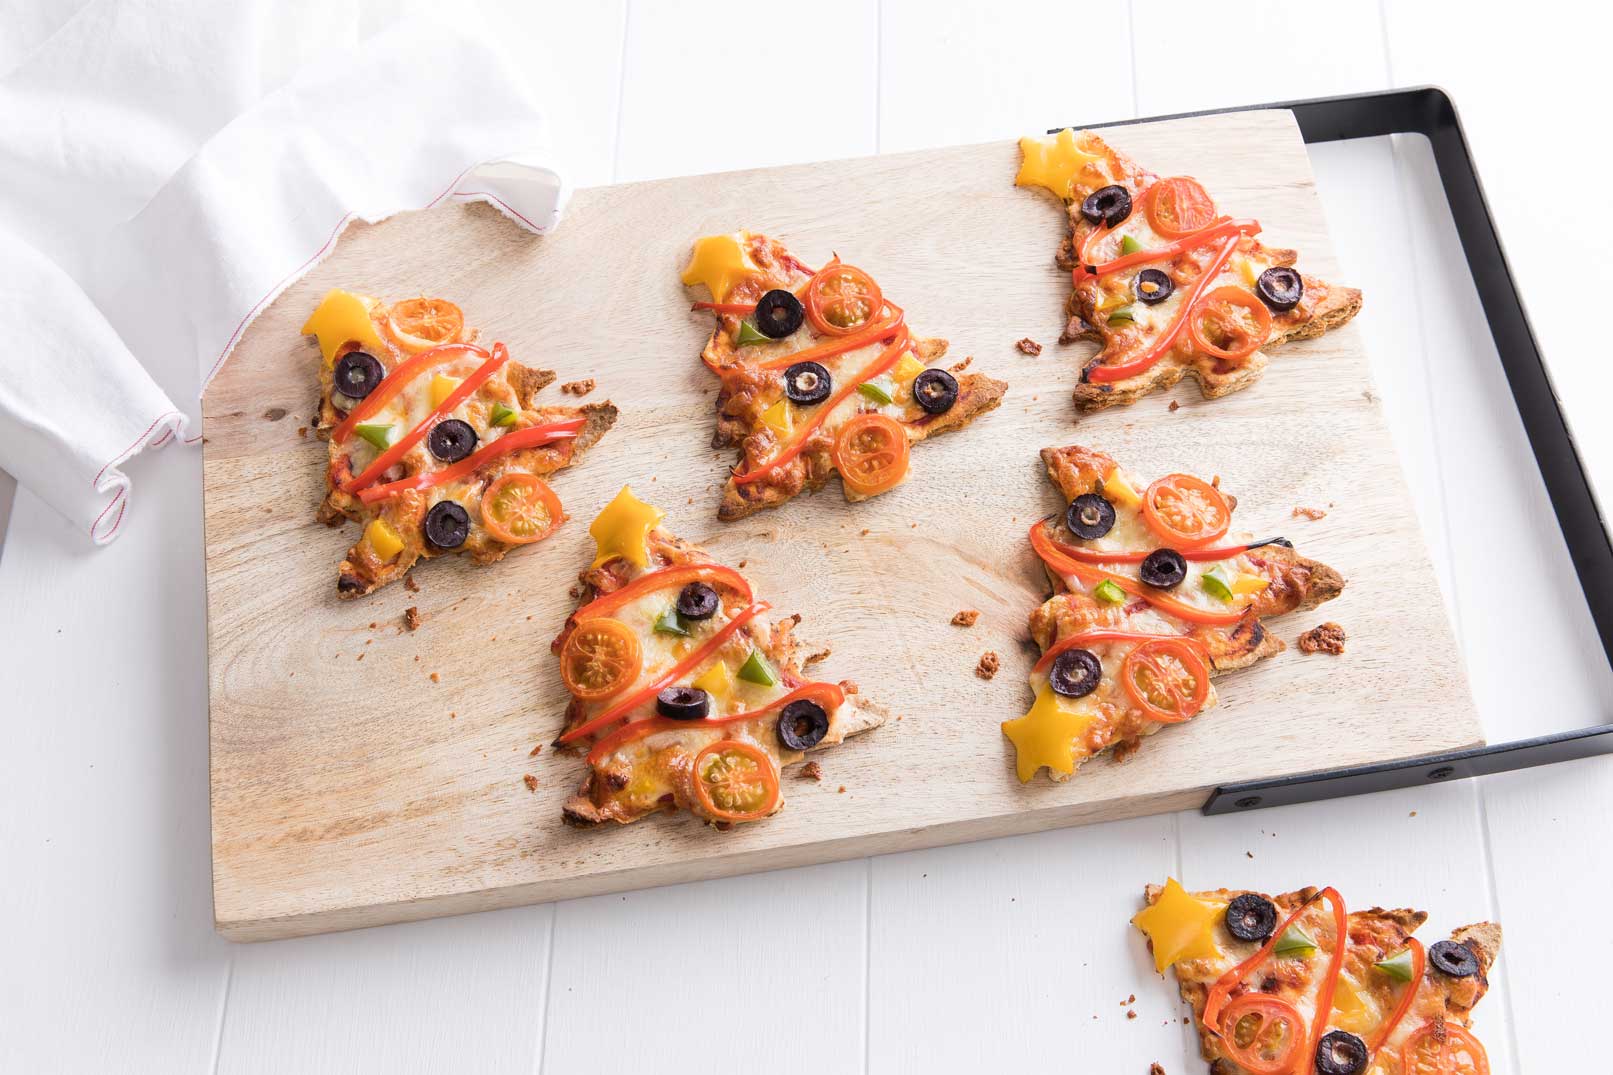 Alt: Seven baked Christmas tree pizzas served on a wooden chopping board.